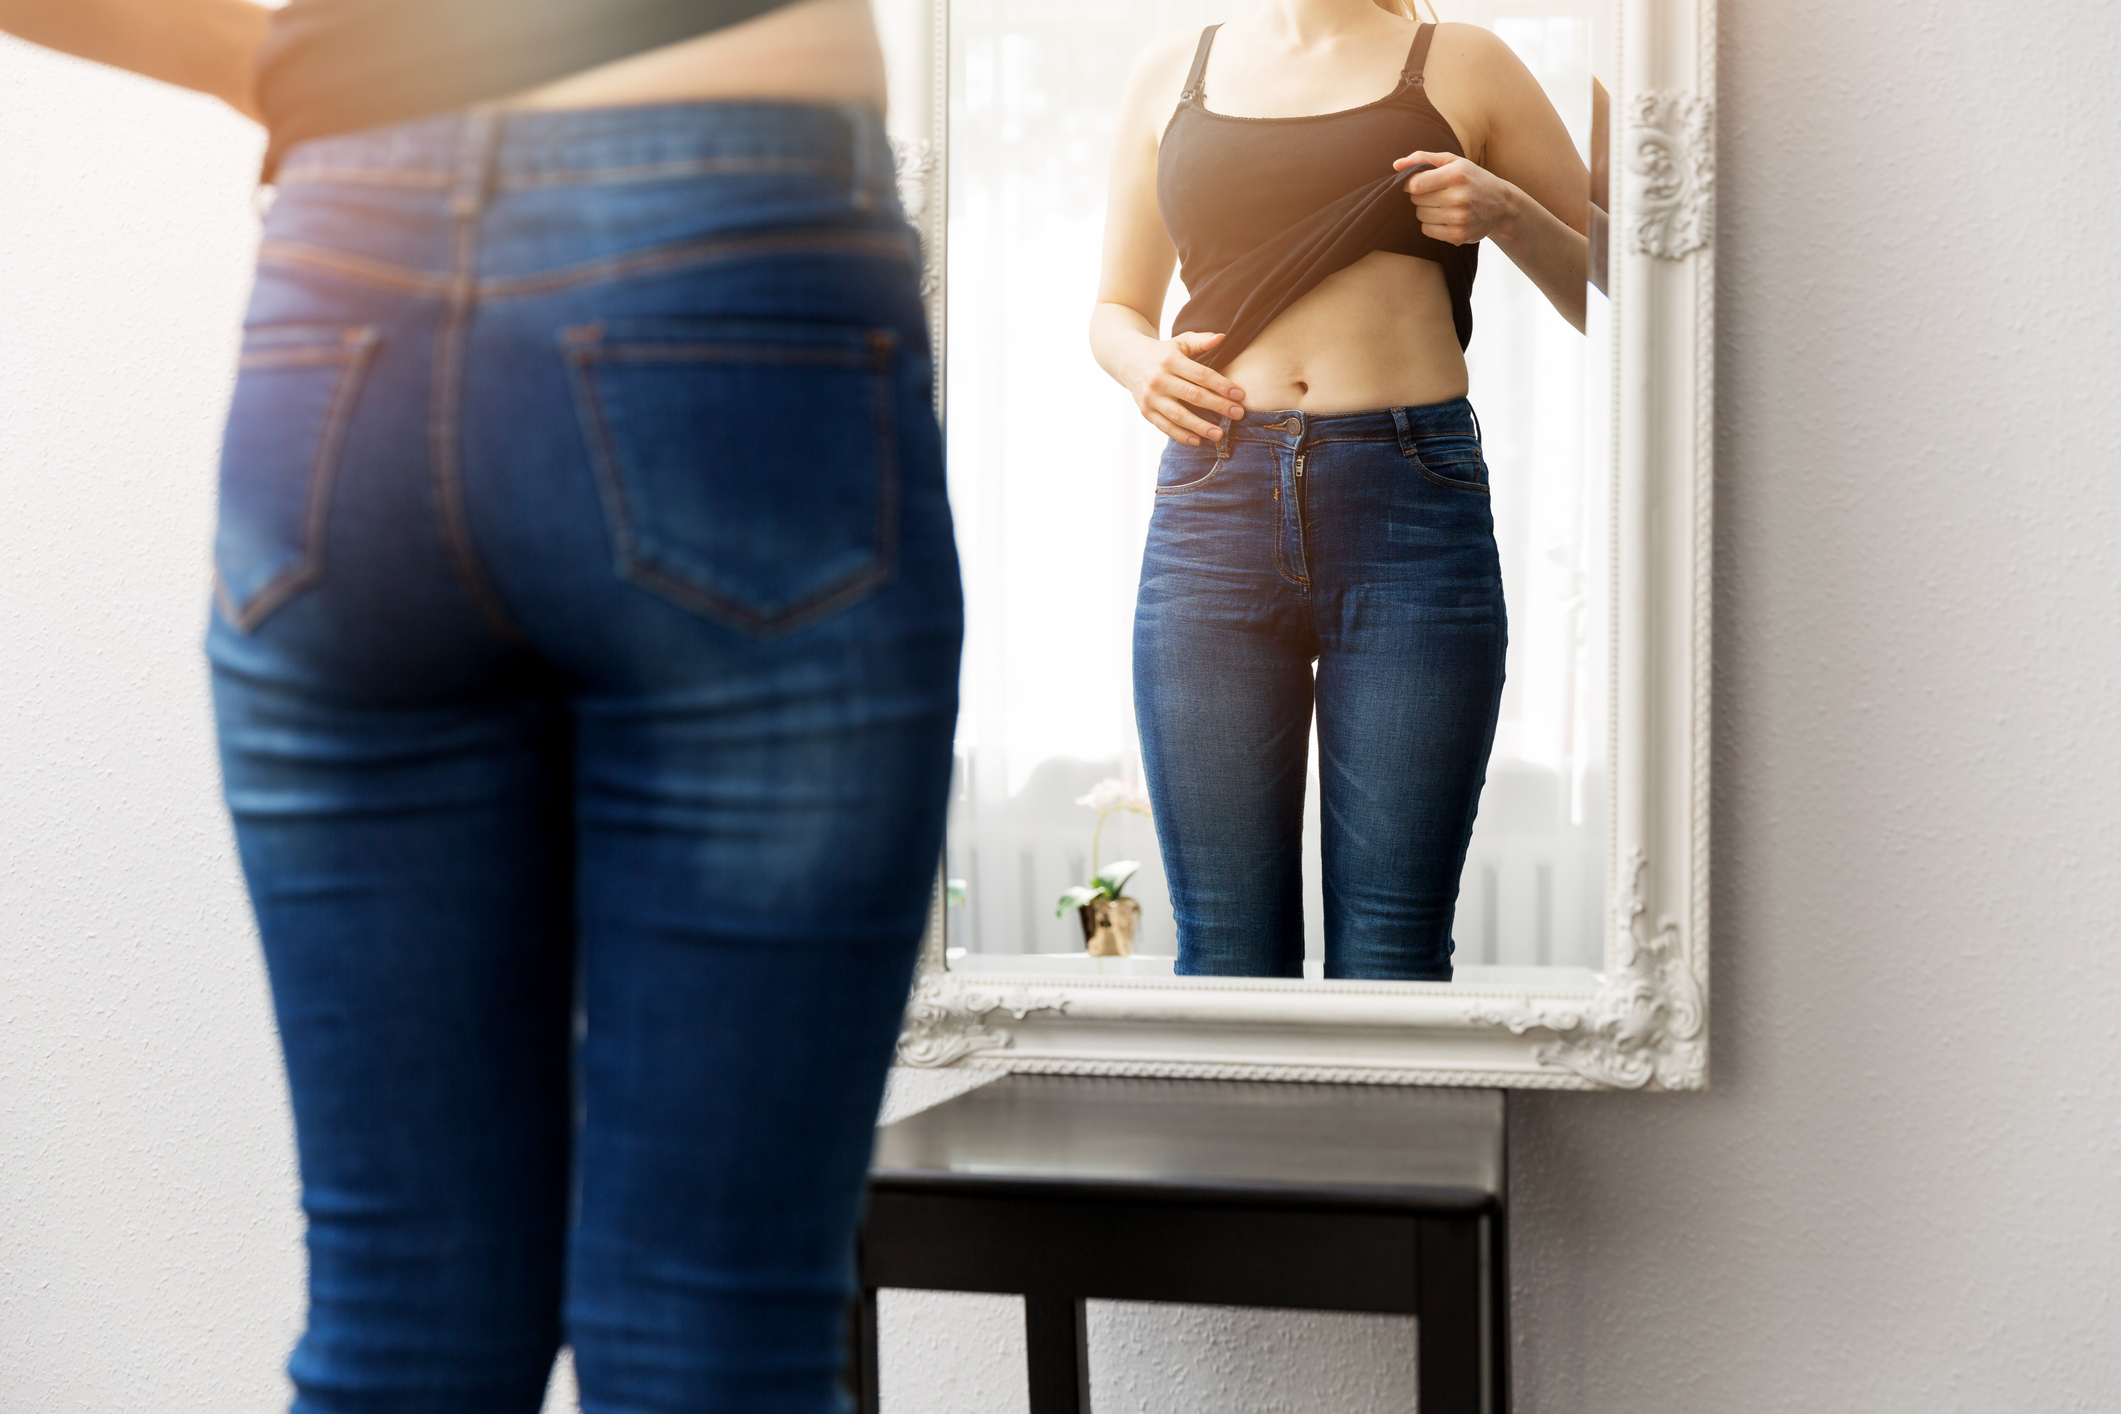 My Child is Struggling with Their Body Image –  How Can I Help Them?